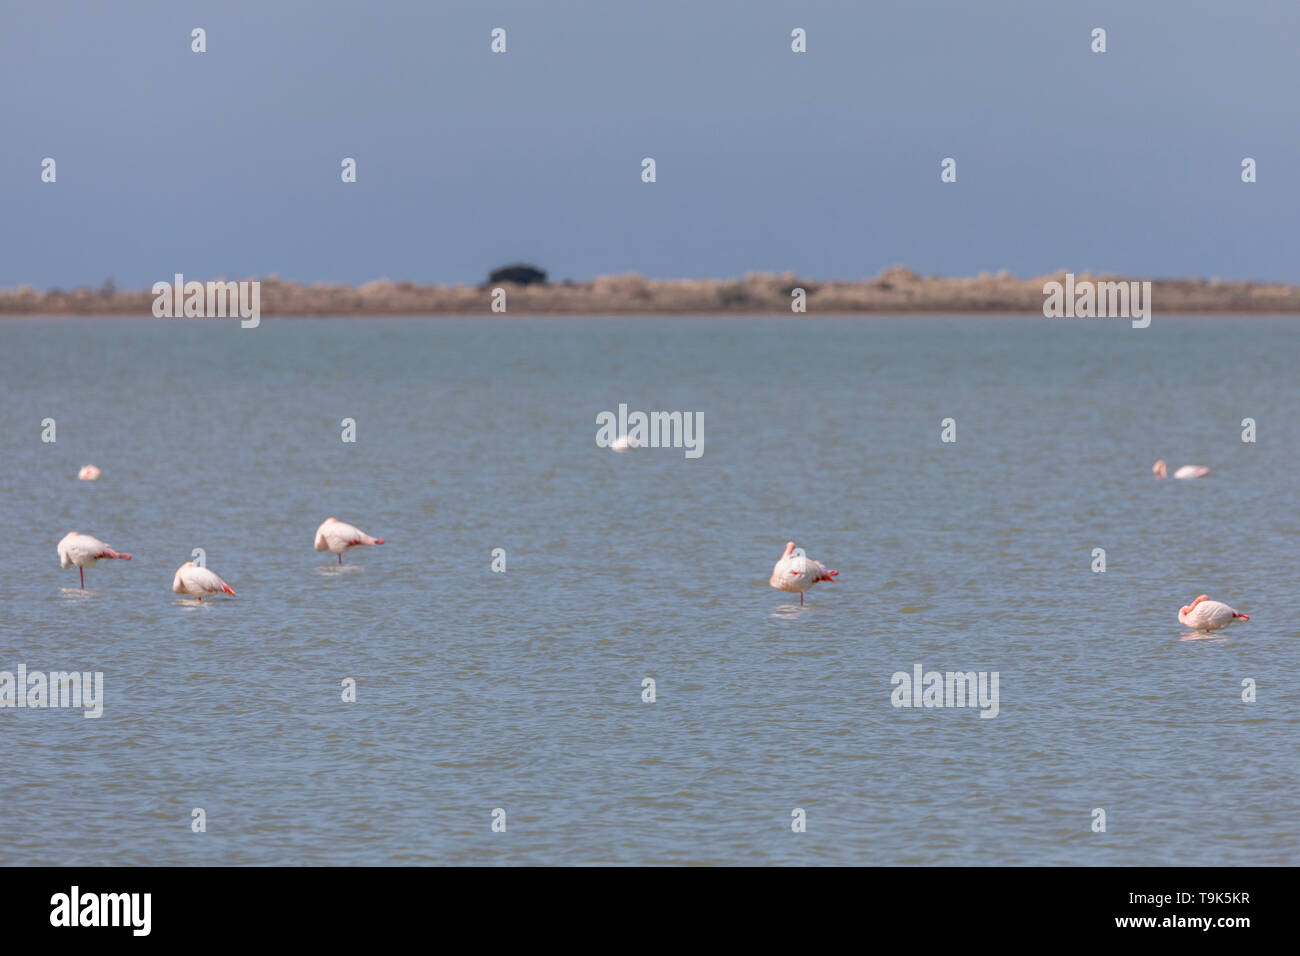 Flock of Greater flamingos, Phoenicopterus roseus, on a lake in Camargue, France. Stock Photo